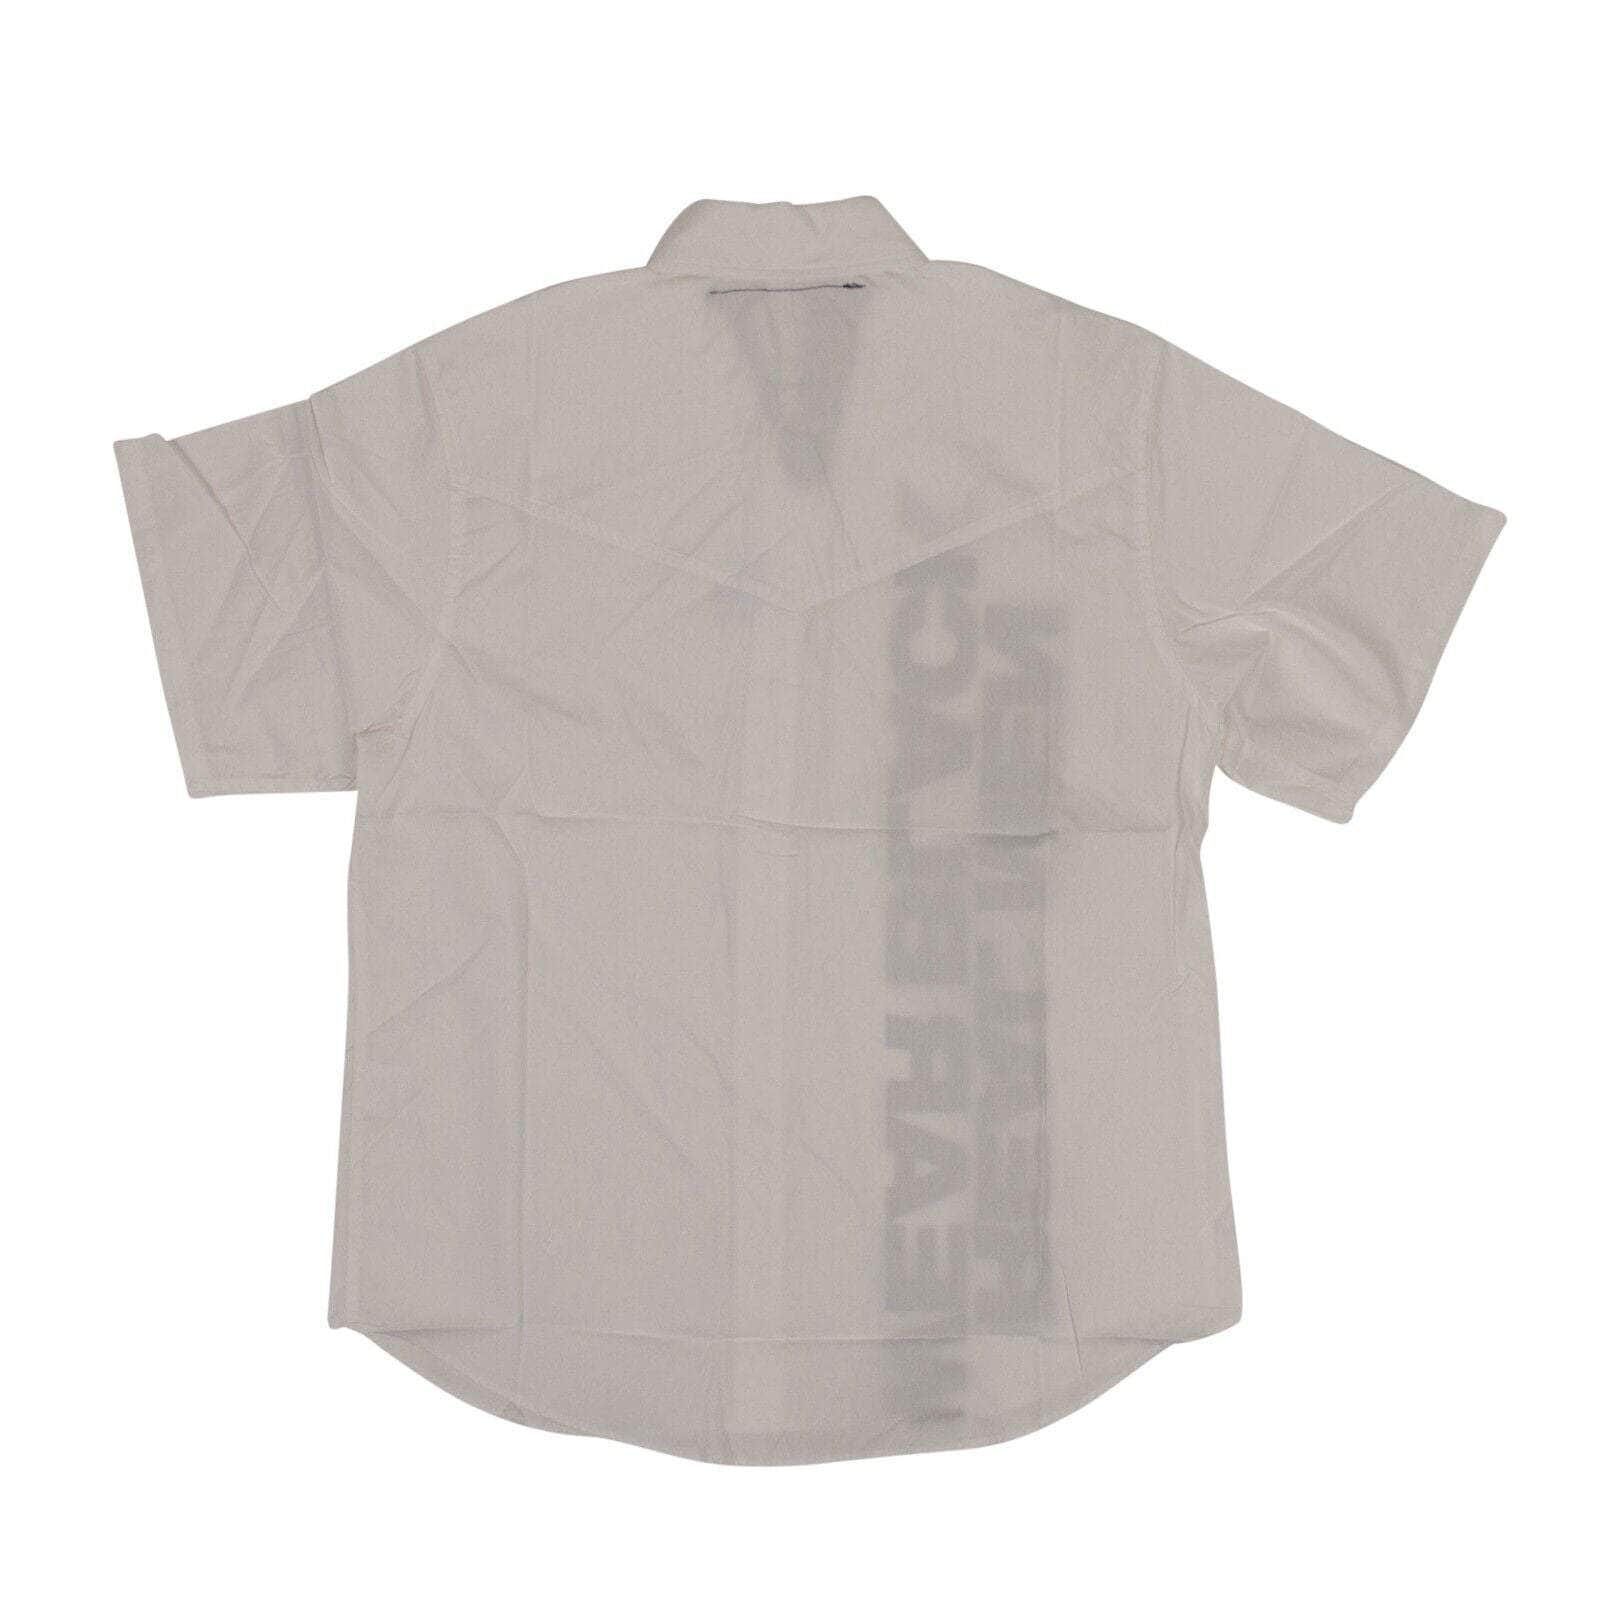 Vlone channelenable-all, chicmi, couponcollection, gender-mens, main-clothing, mens-shoes, shop375, under-250, vlone XL White Real Men Wear Black Button Down Short Sleeve Shirt 72V-17/XL 72V-17/XL